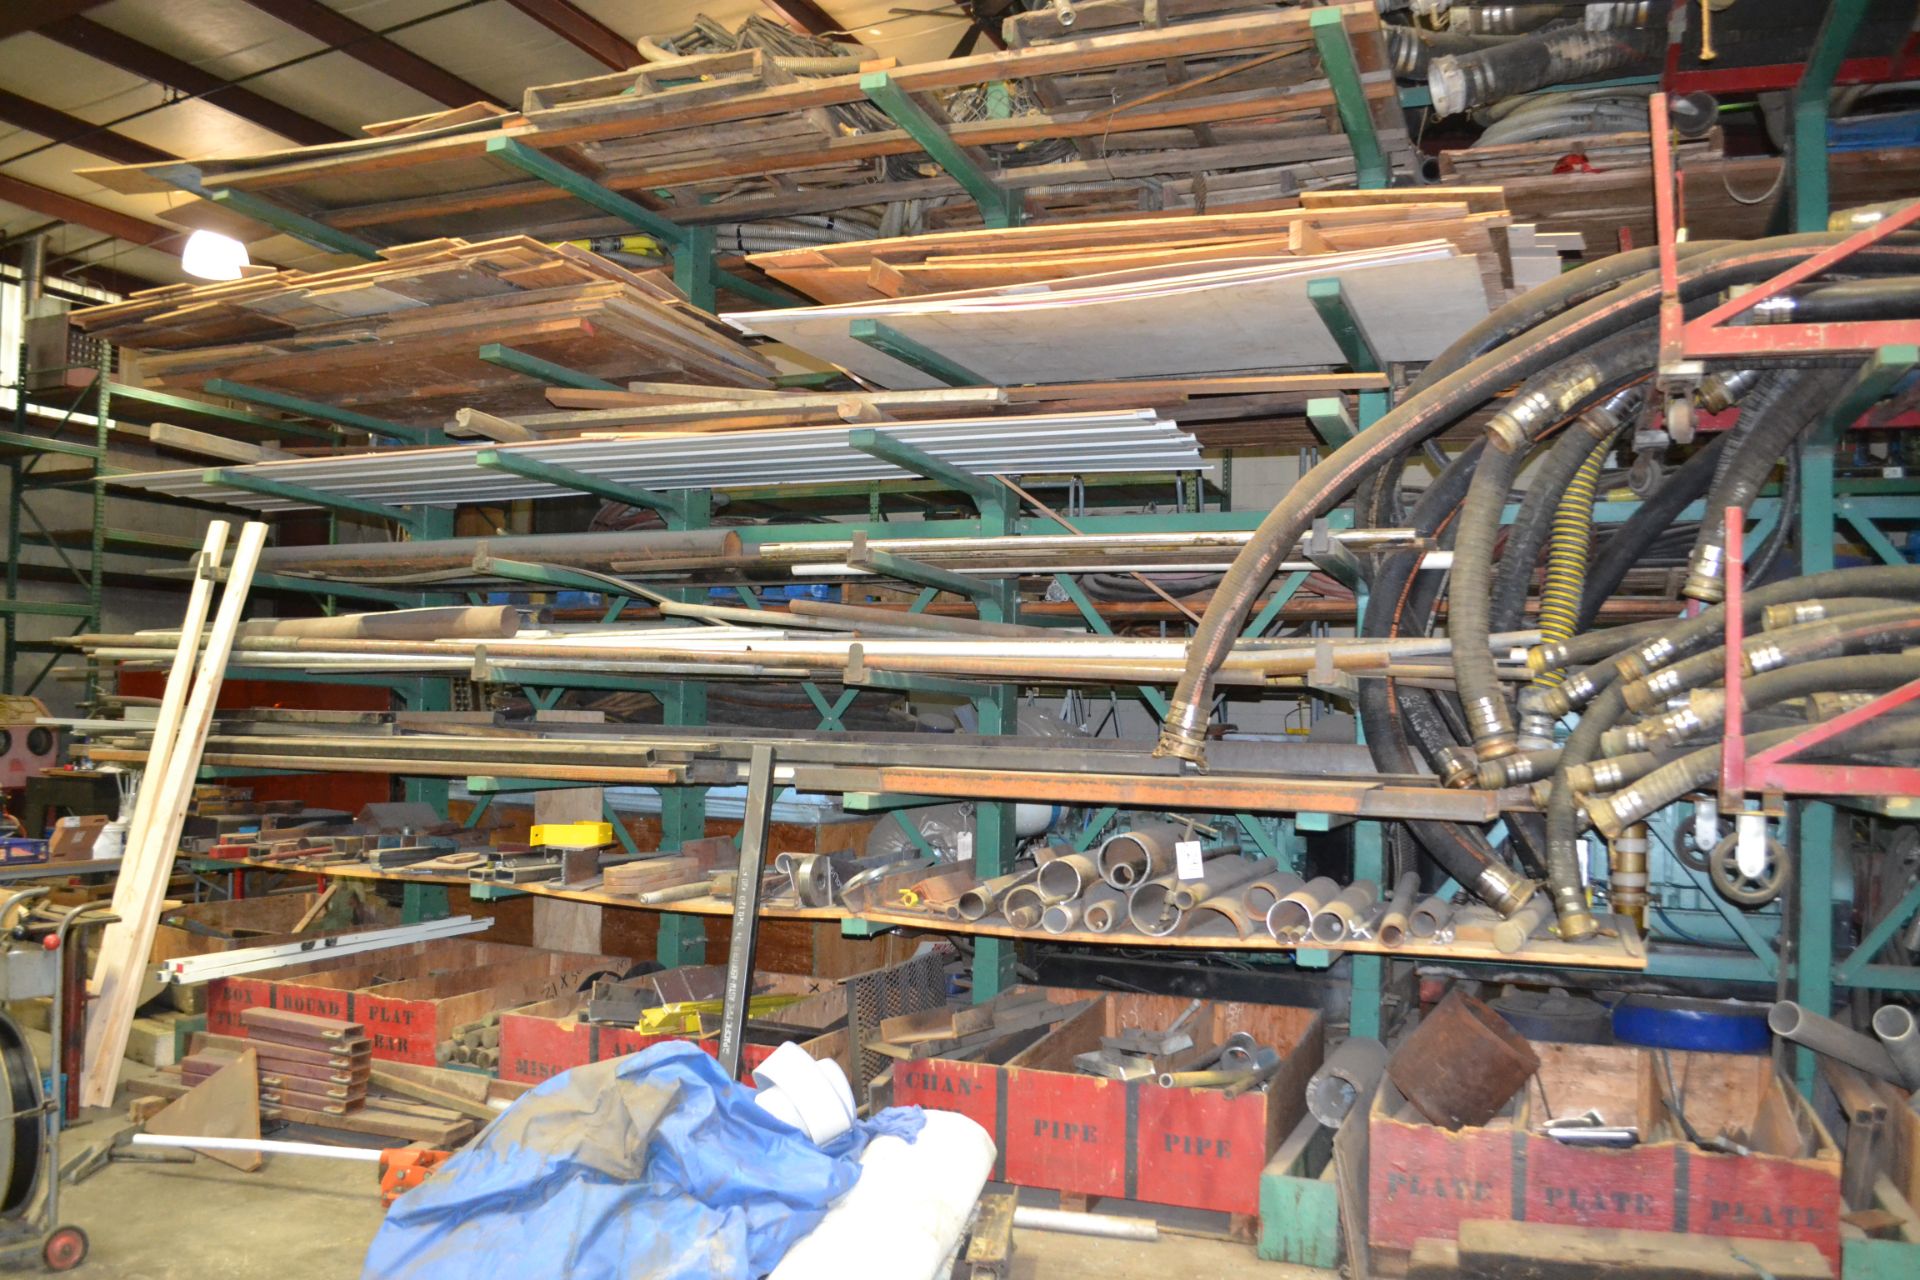 All Metal and Wood Contents on Section of Racking